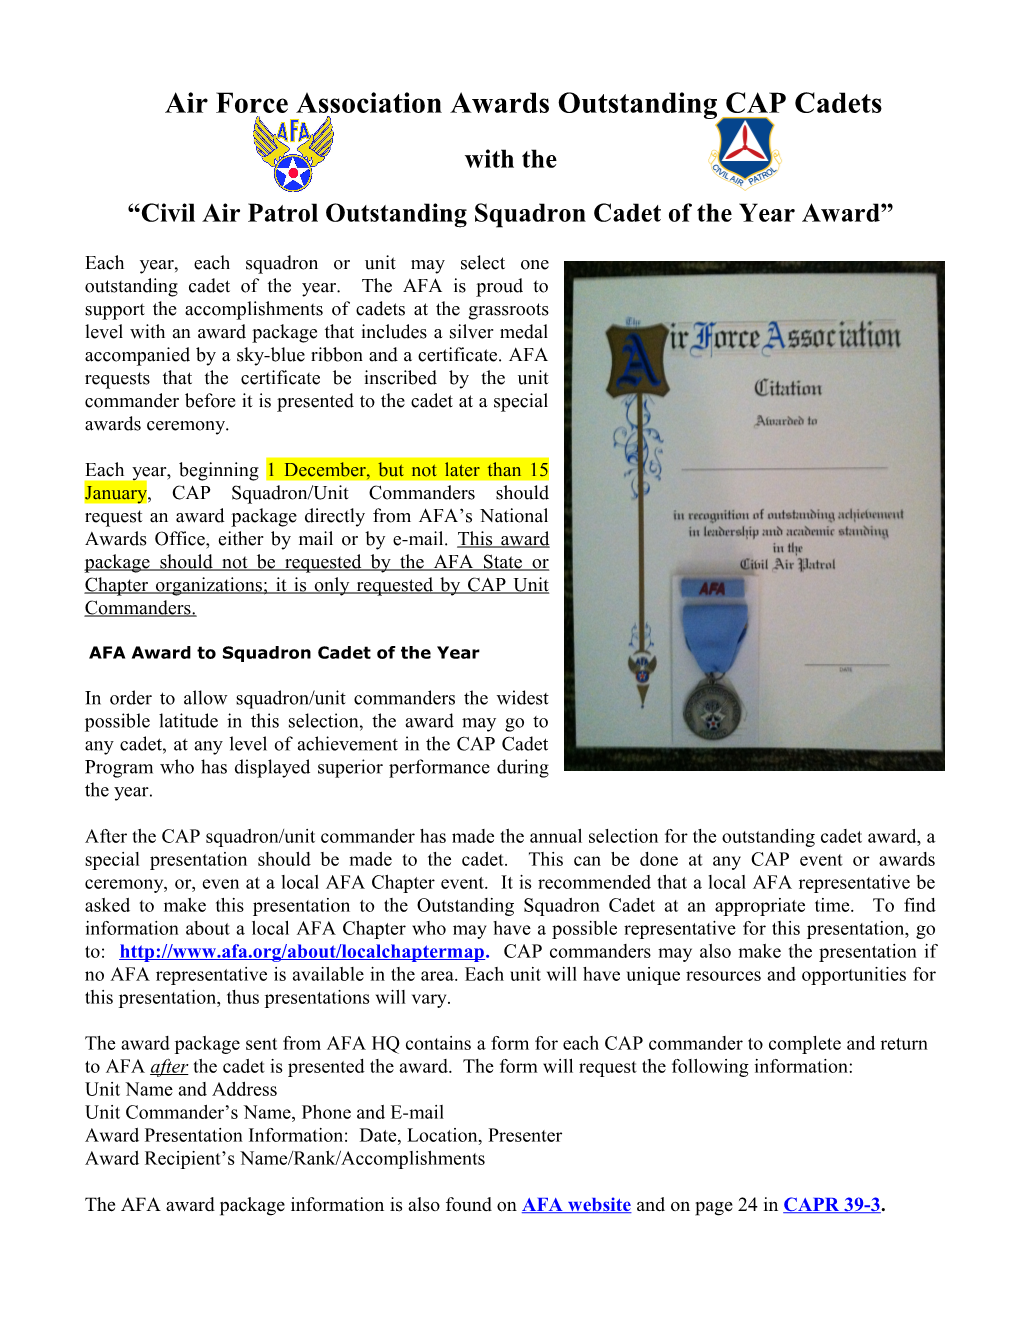 Civil Air Patrol Outstanding Squadron Cadet of the Year Award